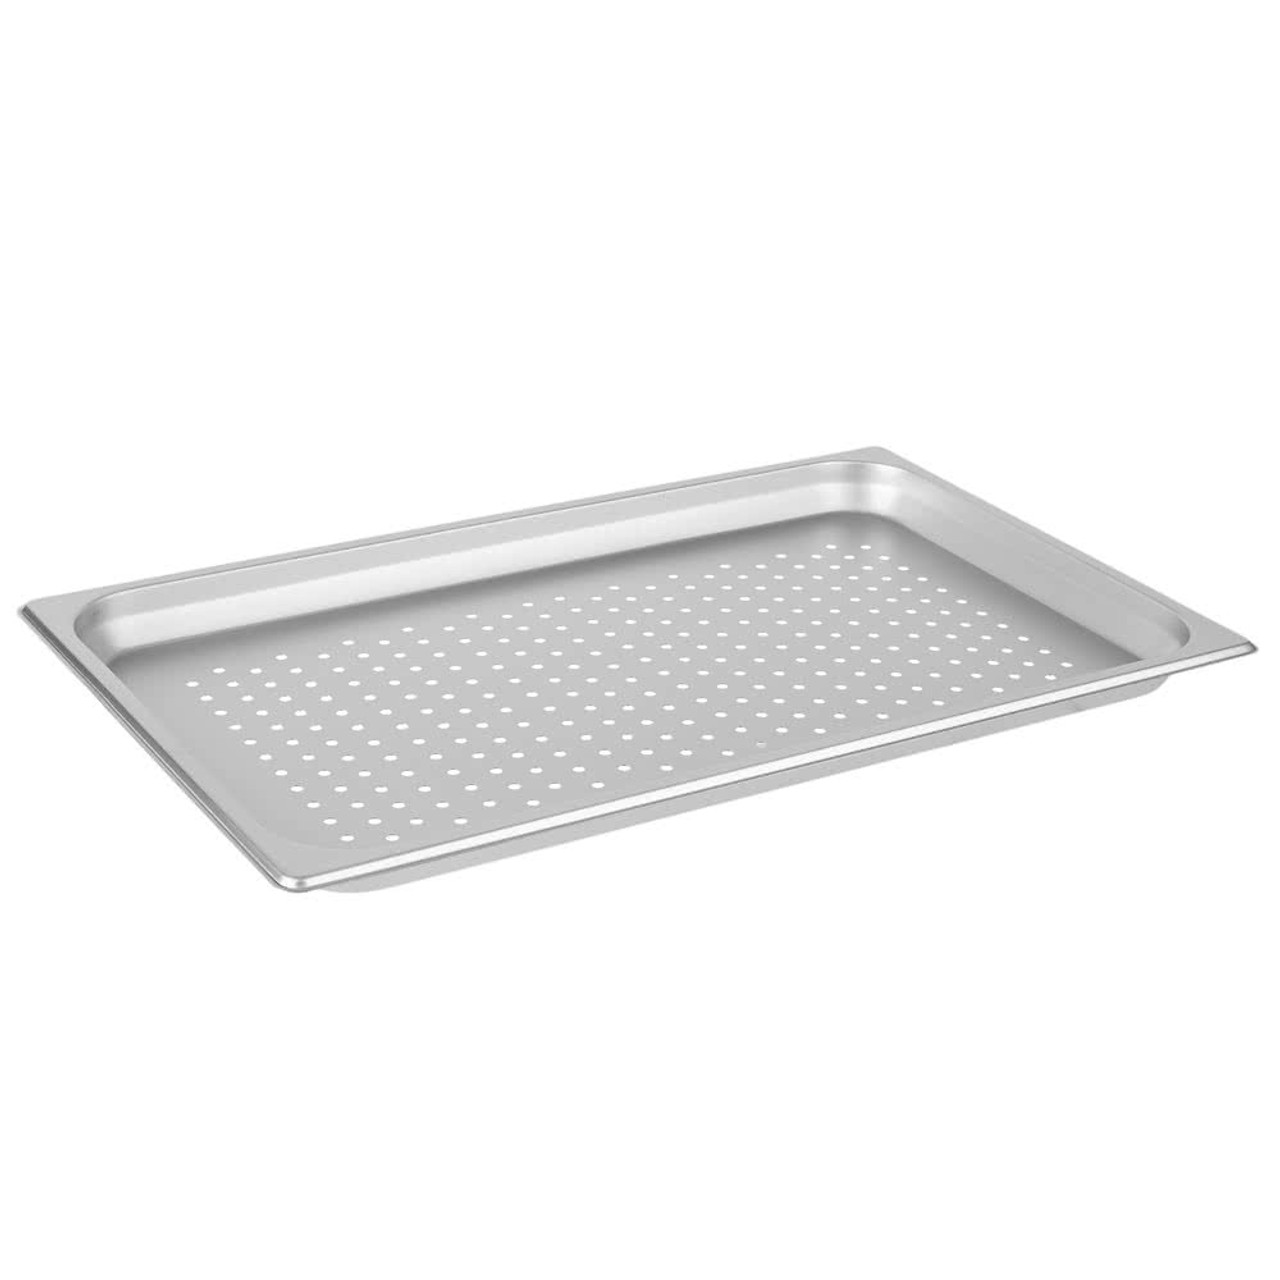 Standard Weight Anti-Jam Perforated Stainless Steel Steam Table / Hotel Pan - 1 1/4" Deep-Full Size 